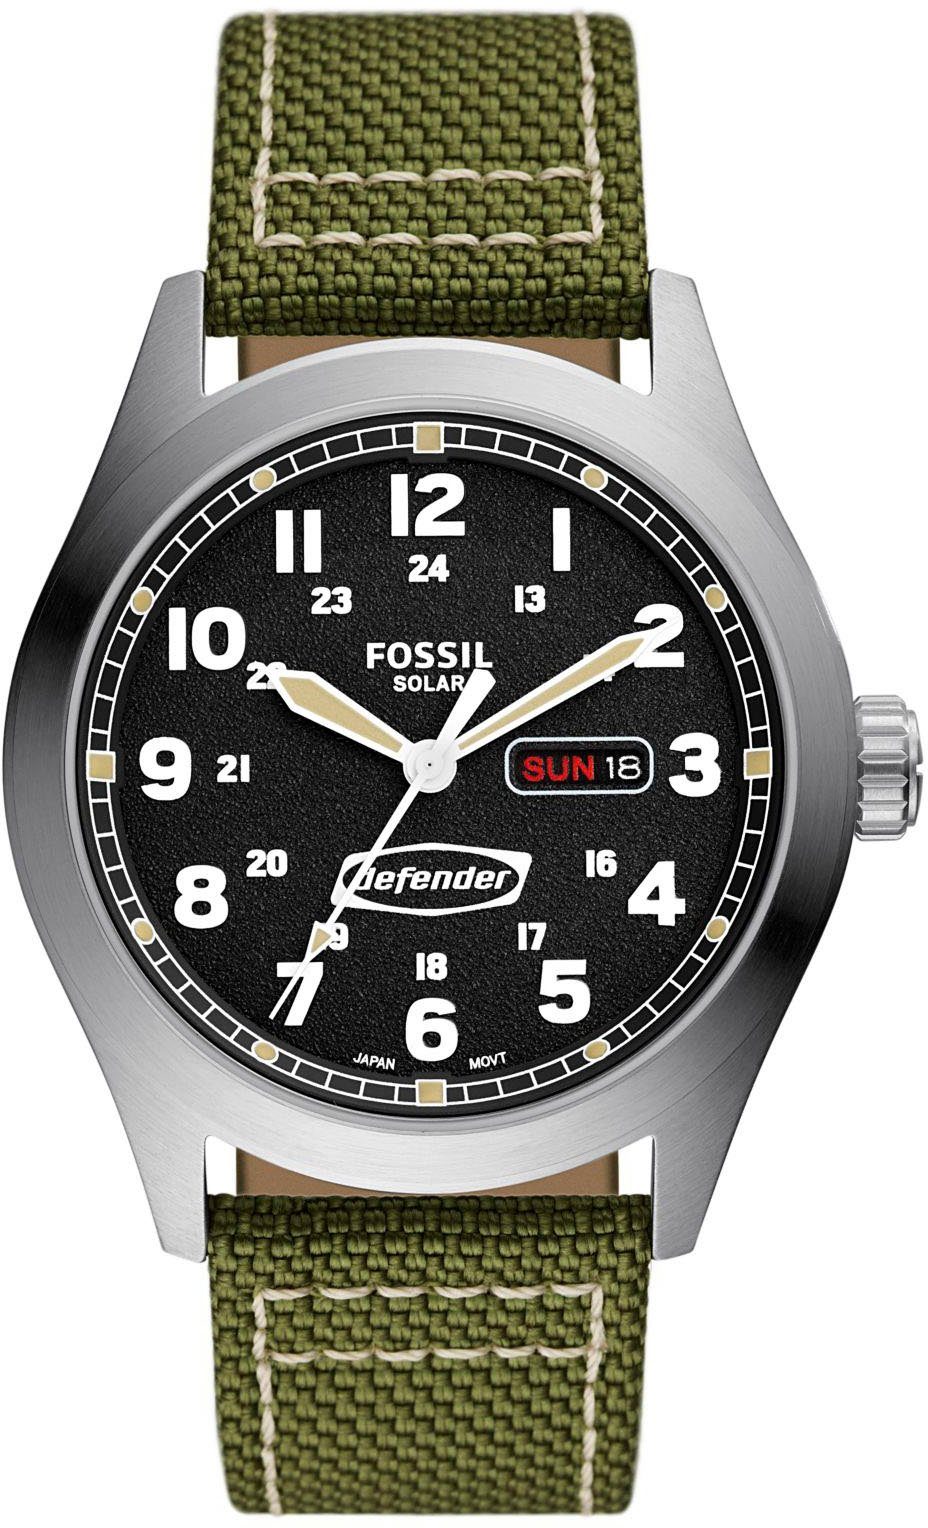 Fossil Solaruhr DEFENDER, edition FS5977, limited